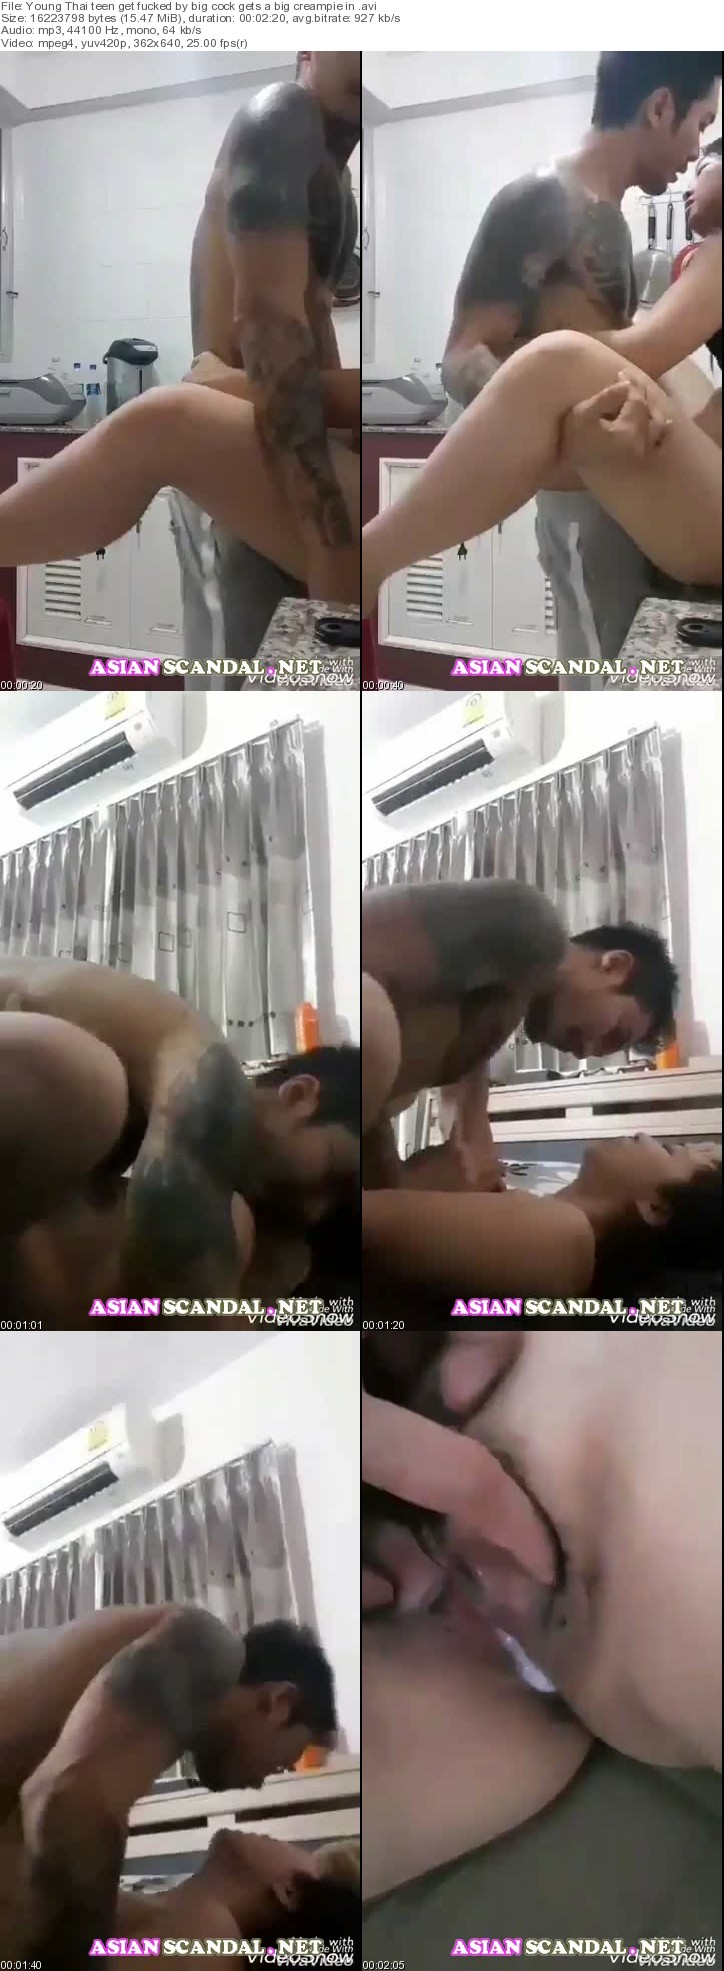 Thai teen get fucked by big cock gets a big creampie in